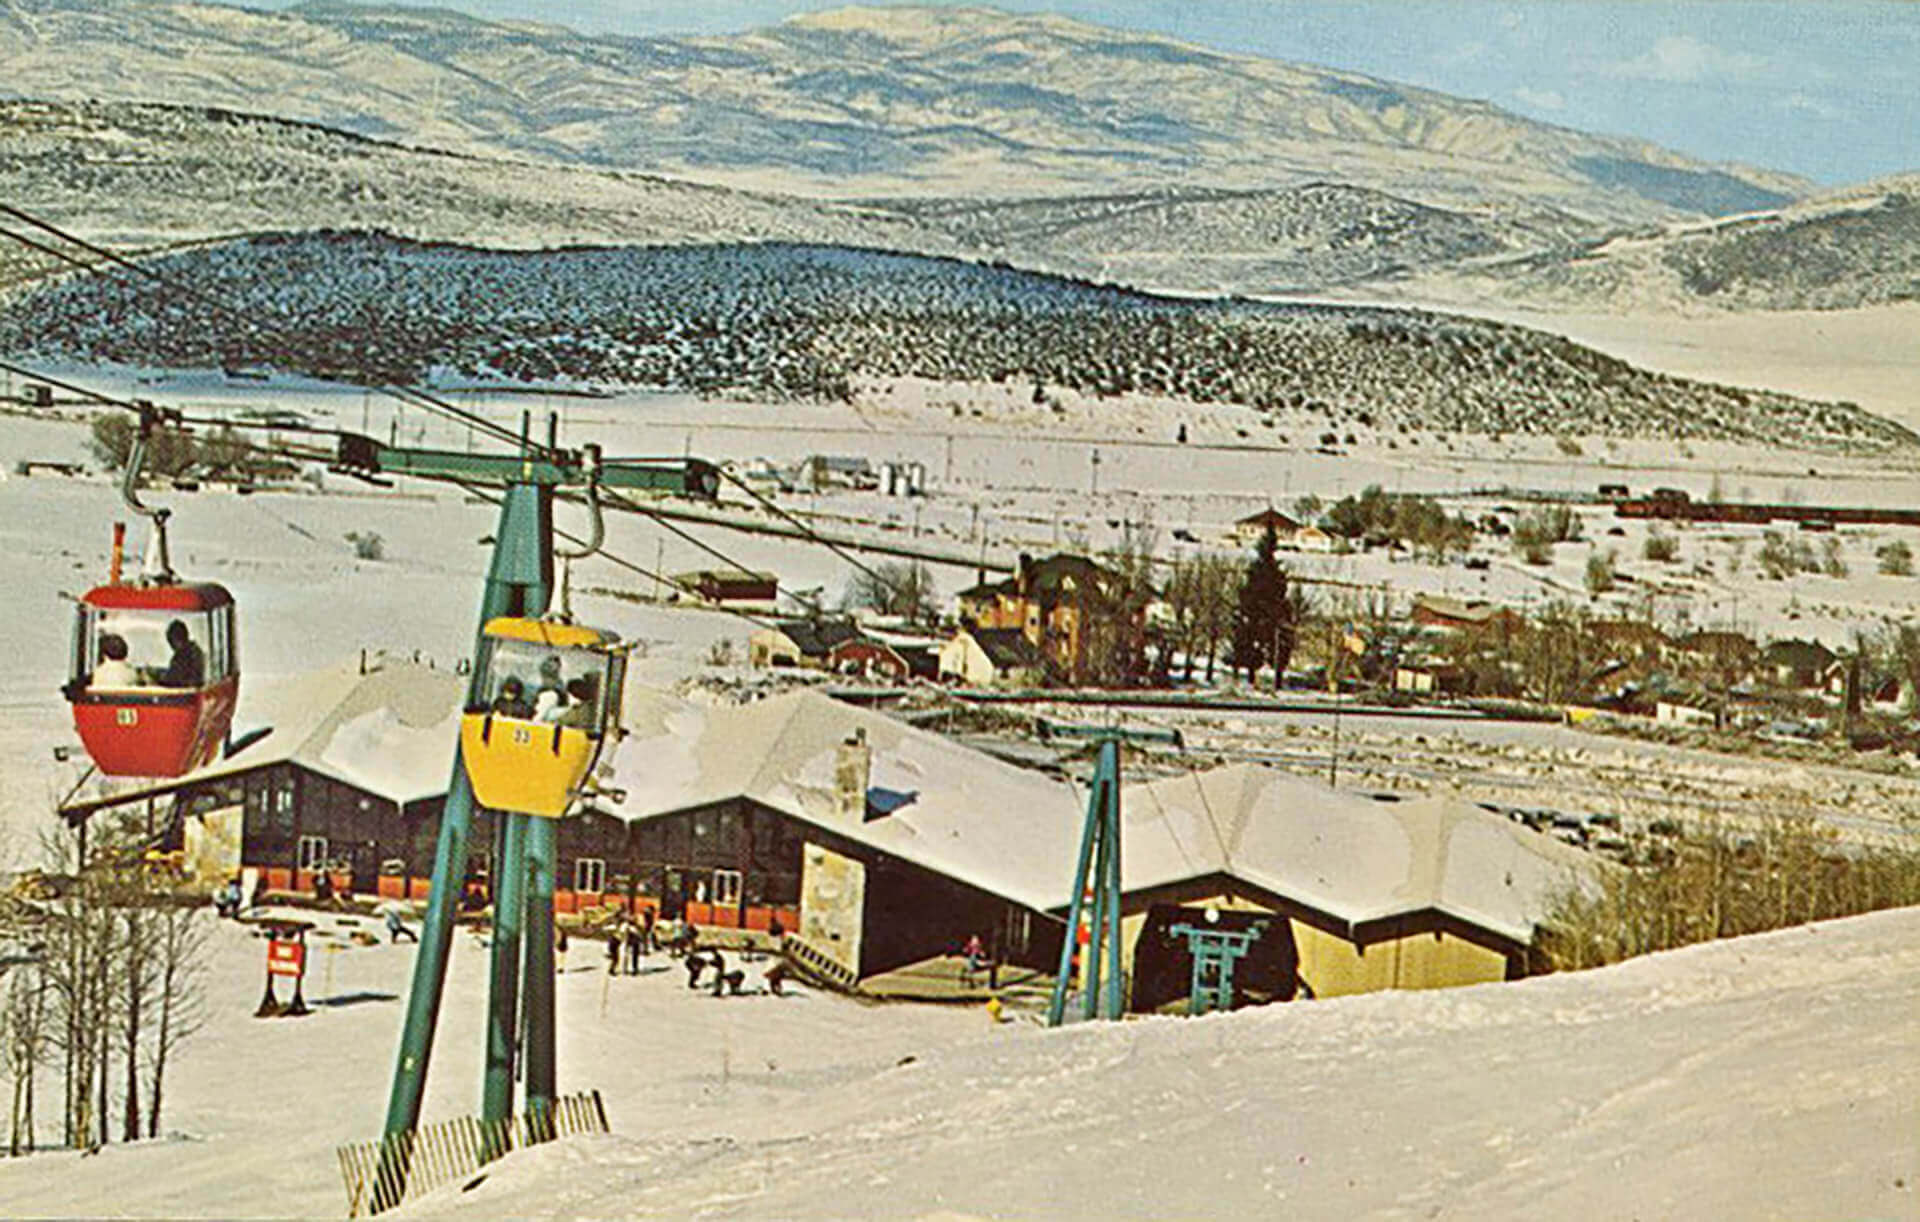 People riding the ski gondola in the foreground with the ski lodge behind in the distance